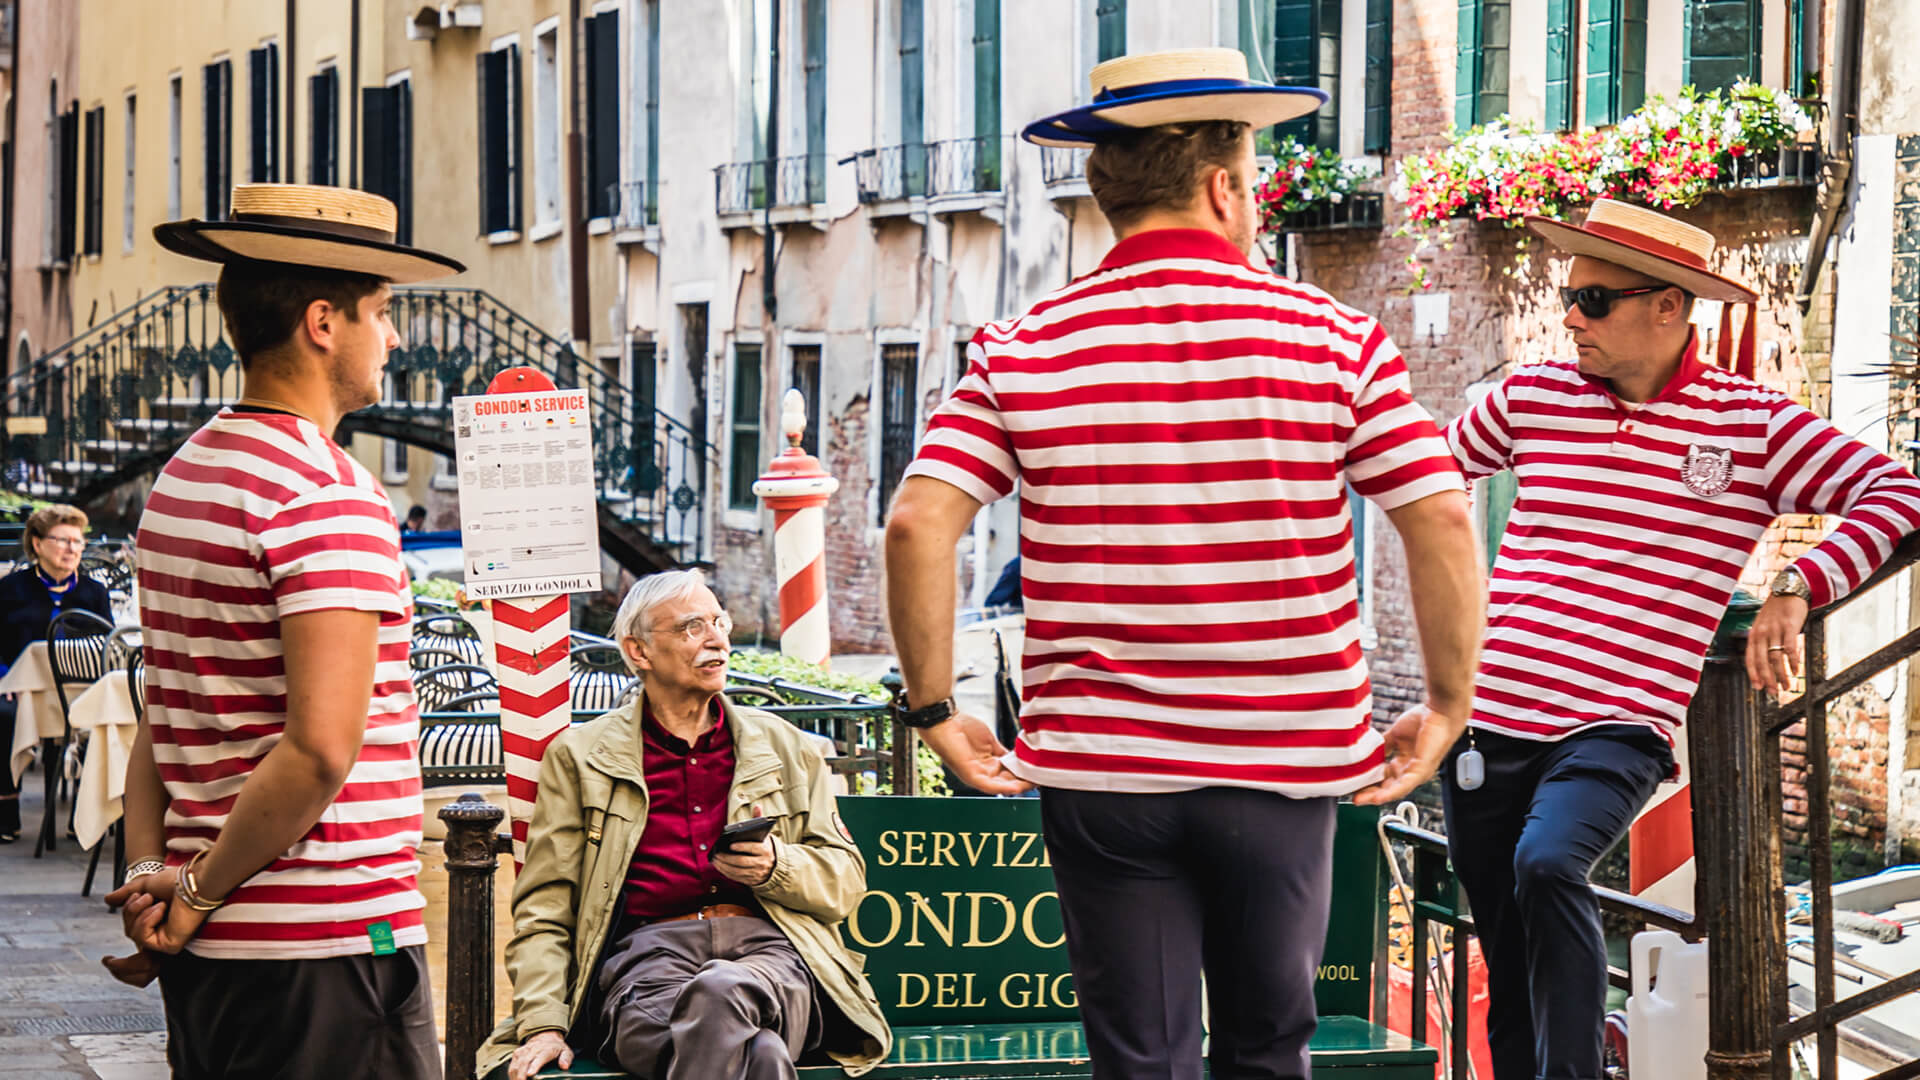 Venetian gondoliers chatting to a local resident on a park bench